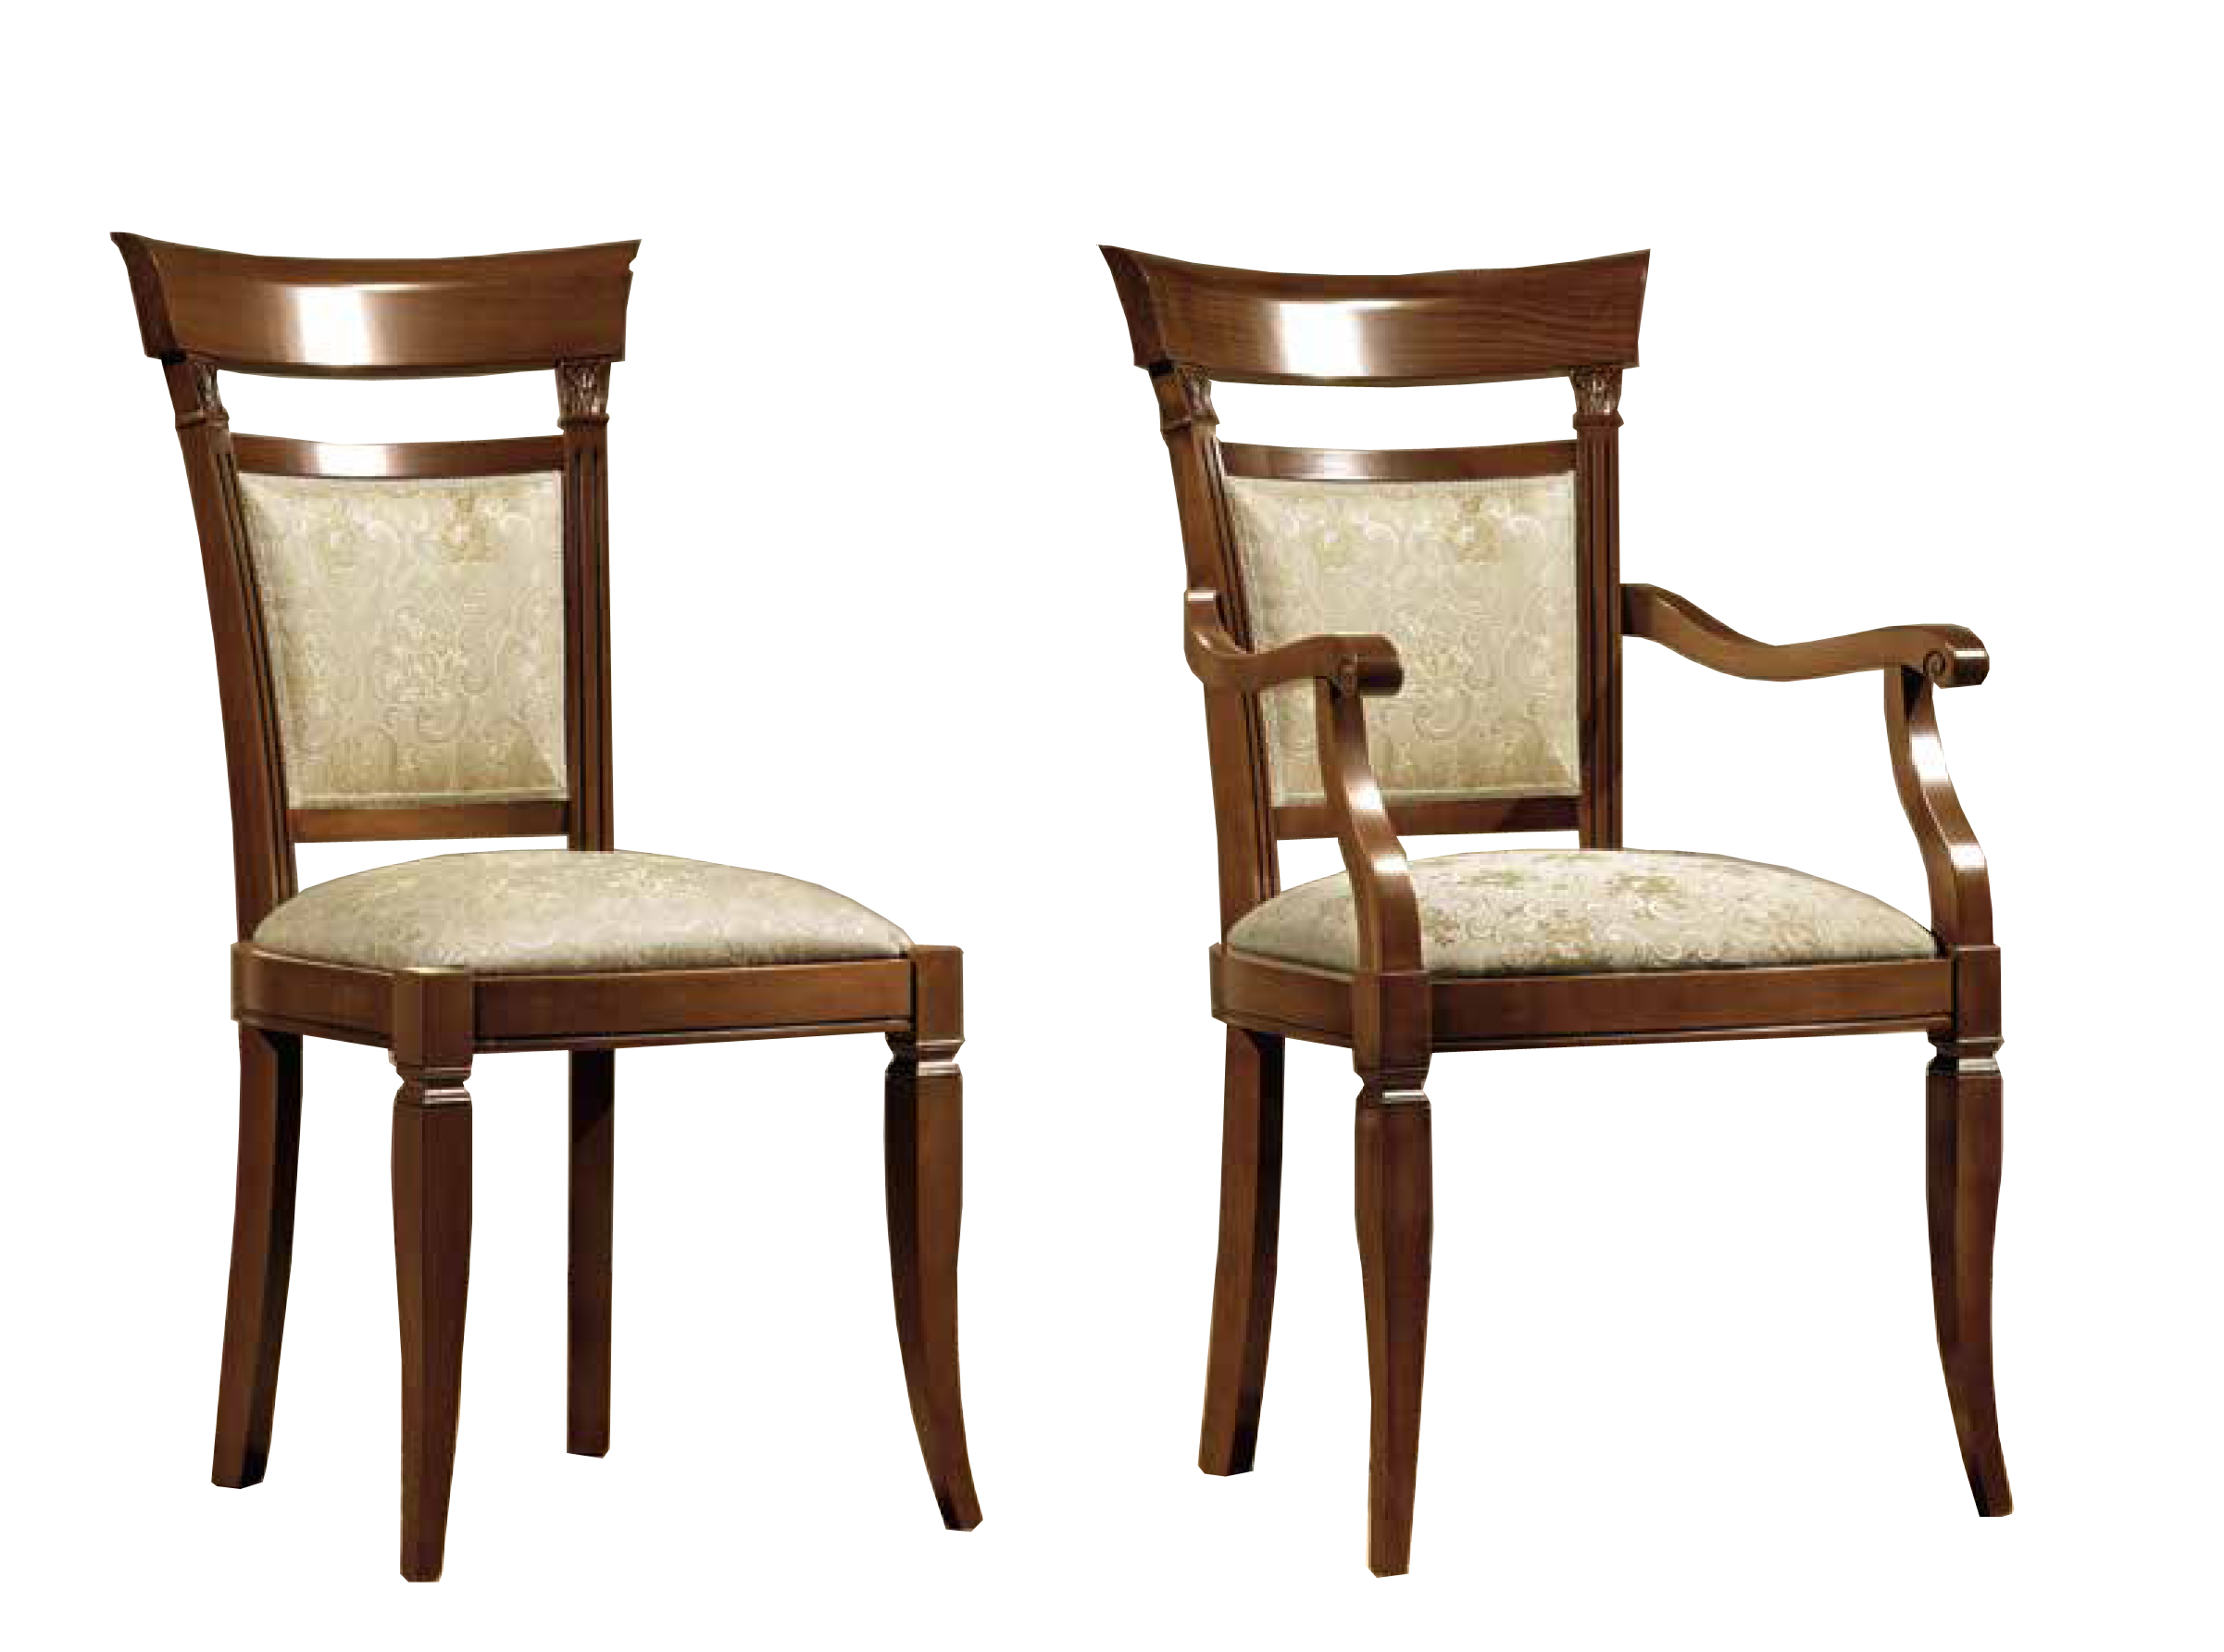 Living Room Furniture Swatches Treviso Chairs Cherry